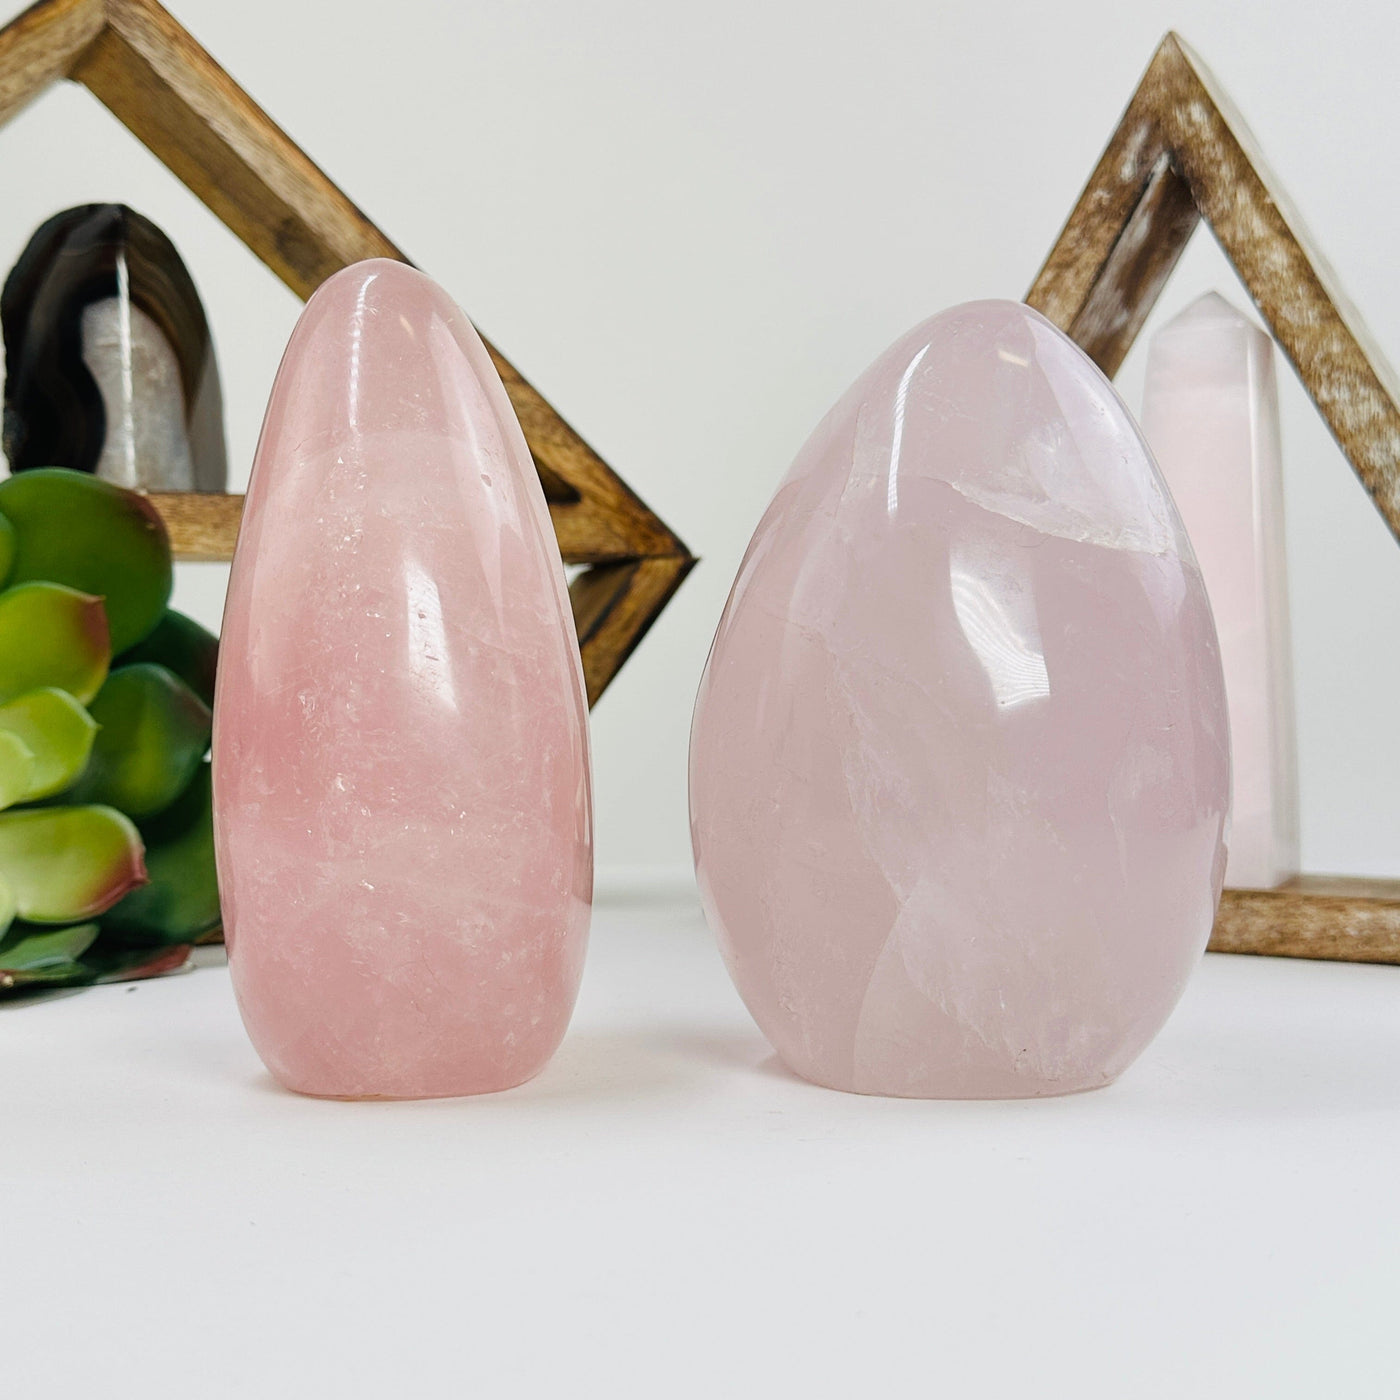 rose quartz cutbase with decorations in the background